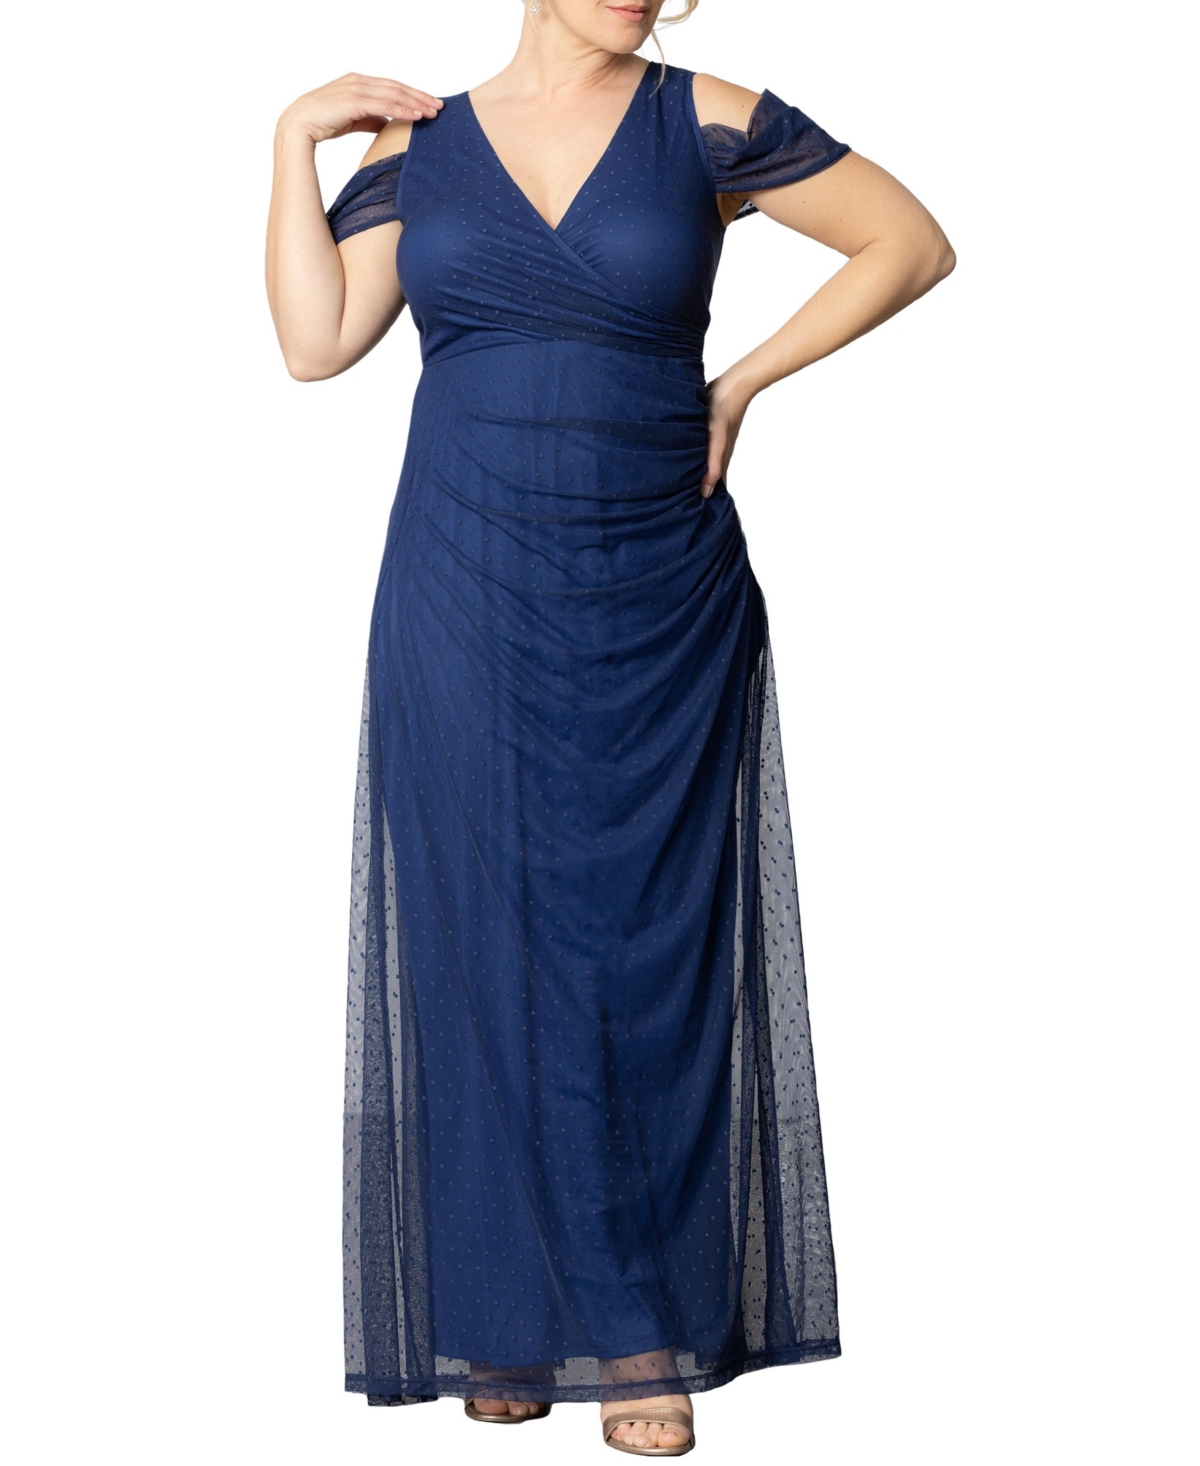 Women's Plus Size Seraphina Mesh Gown - Nocturnal navy